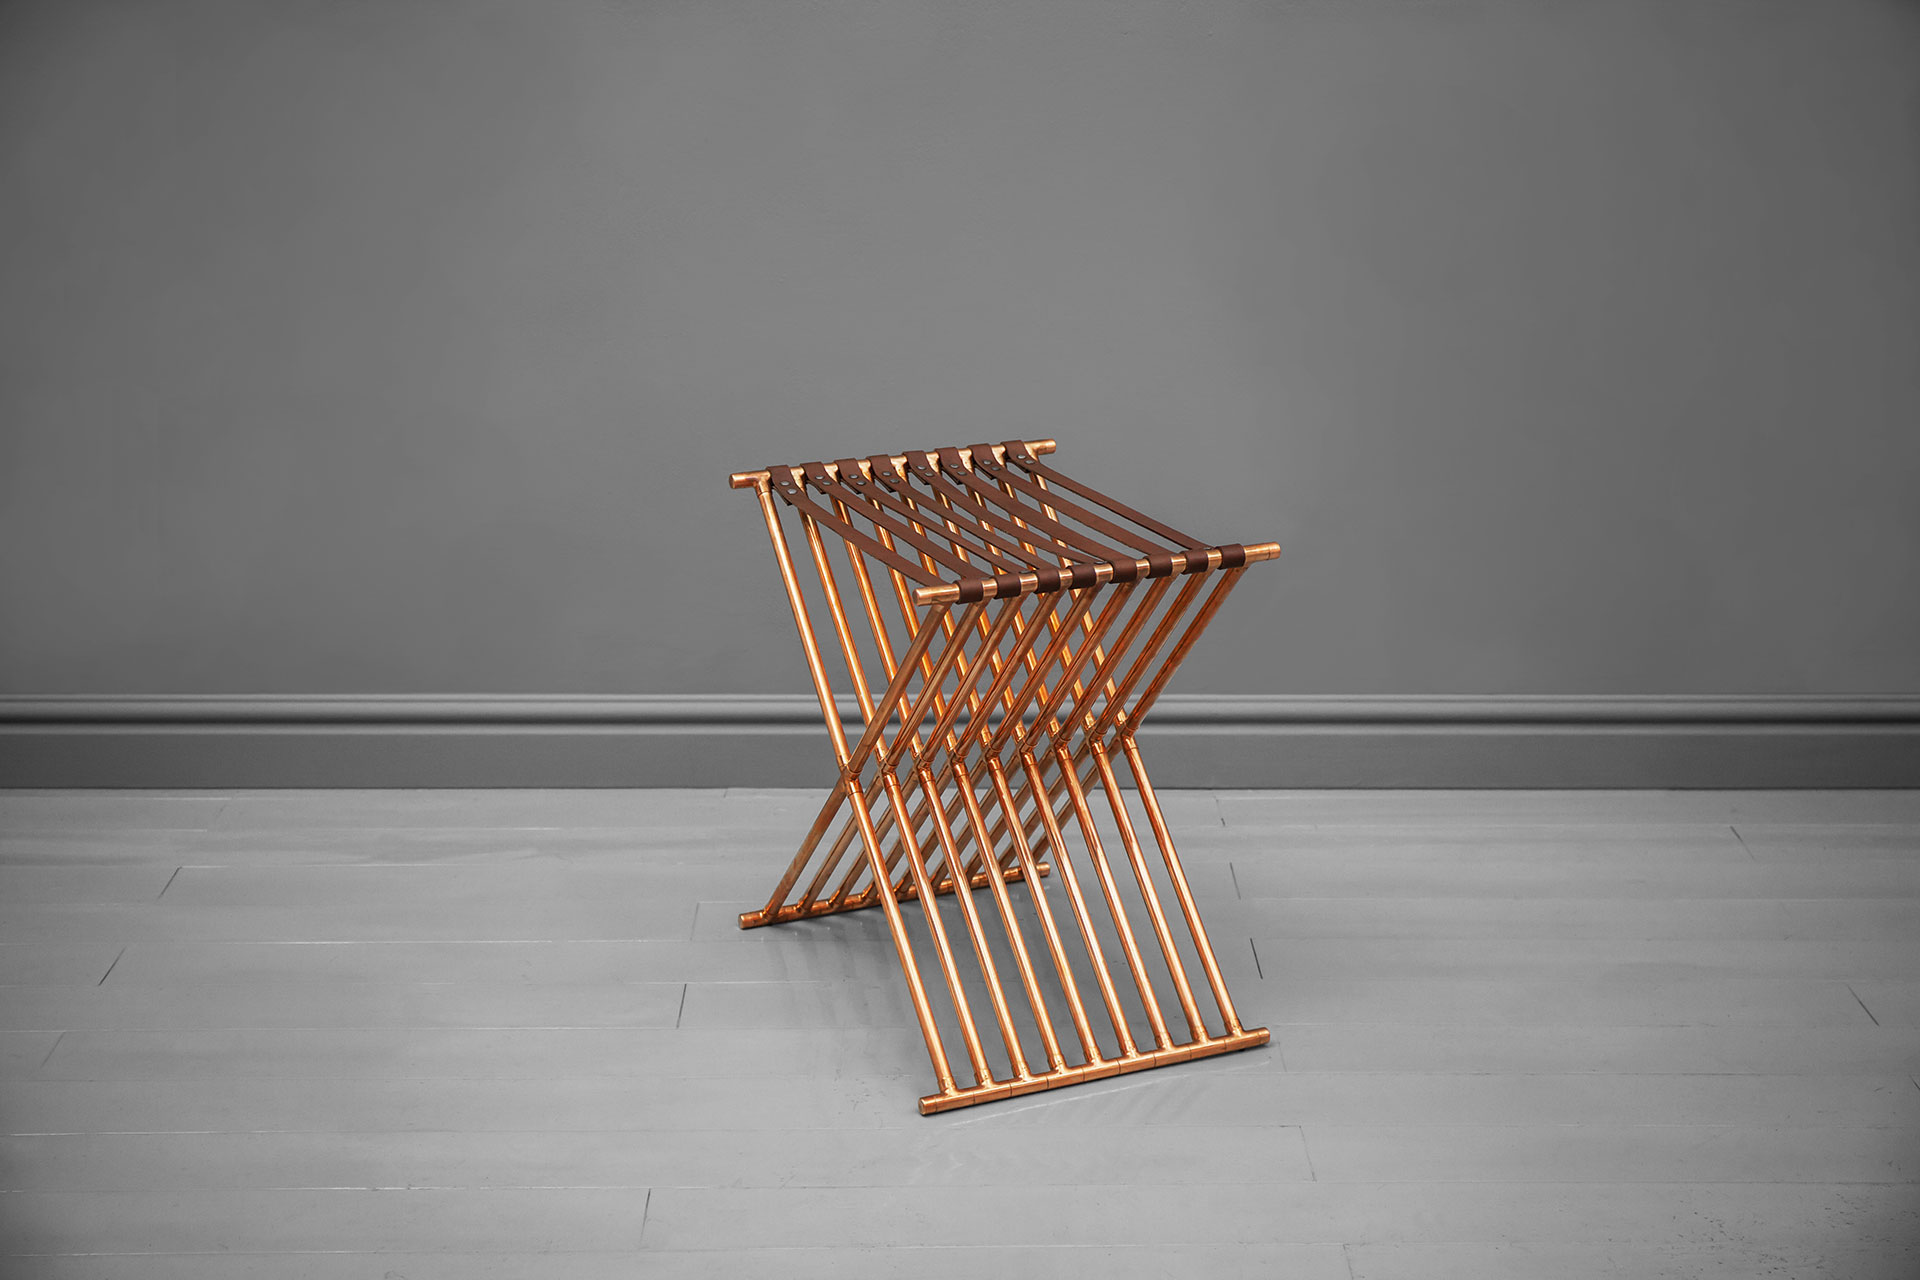 Entrance chair inspired by geometric design